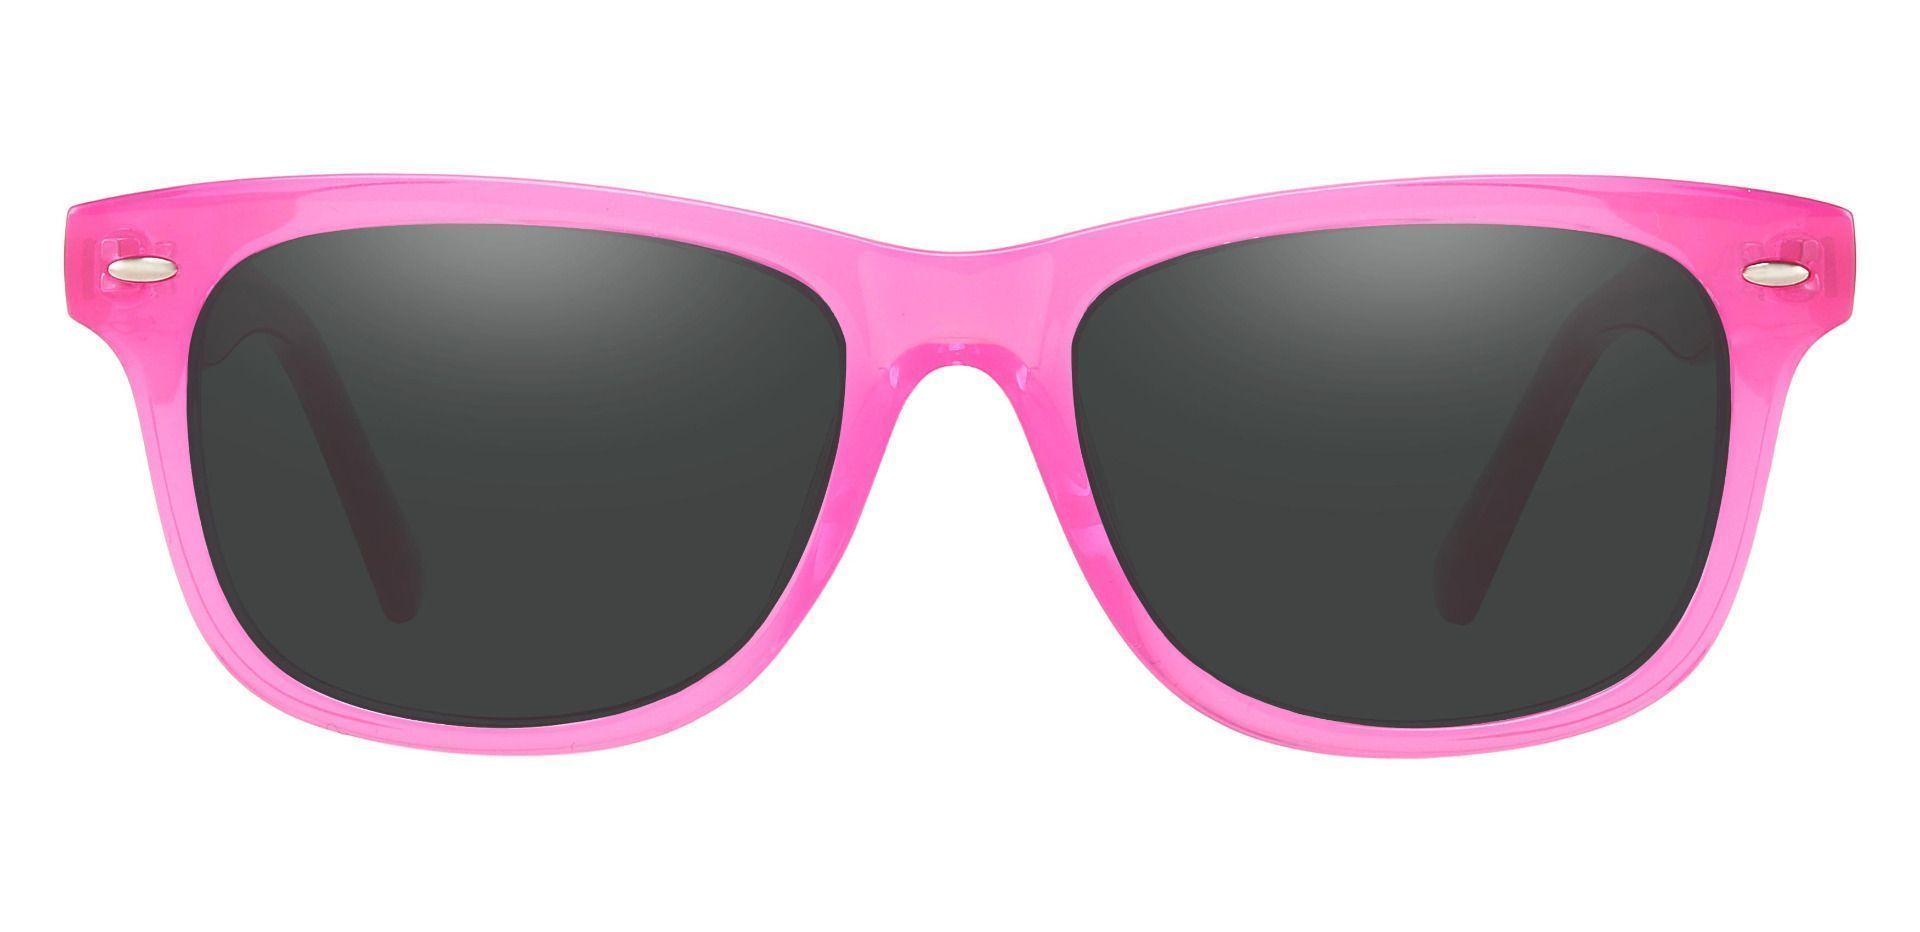 Eureka Square Reading Sunglasses - Pink Frame With Gray Lenses